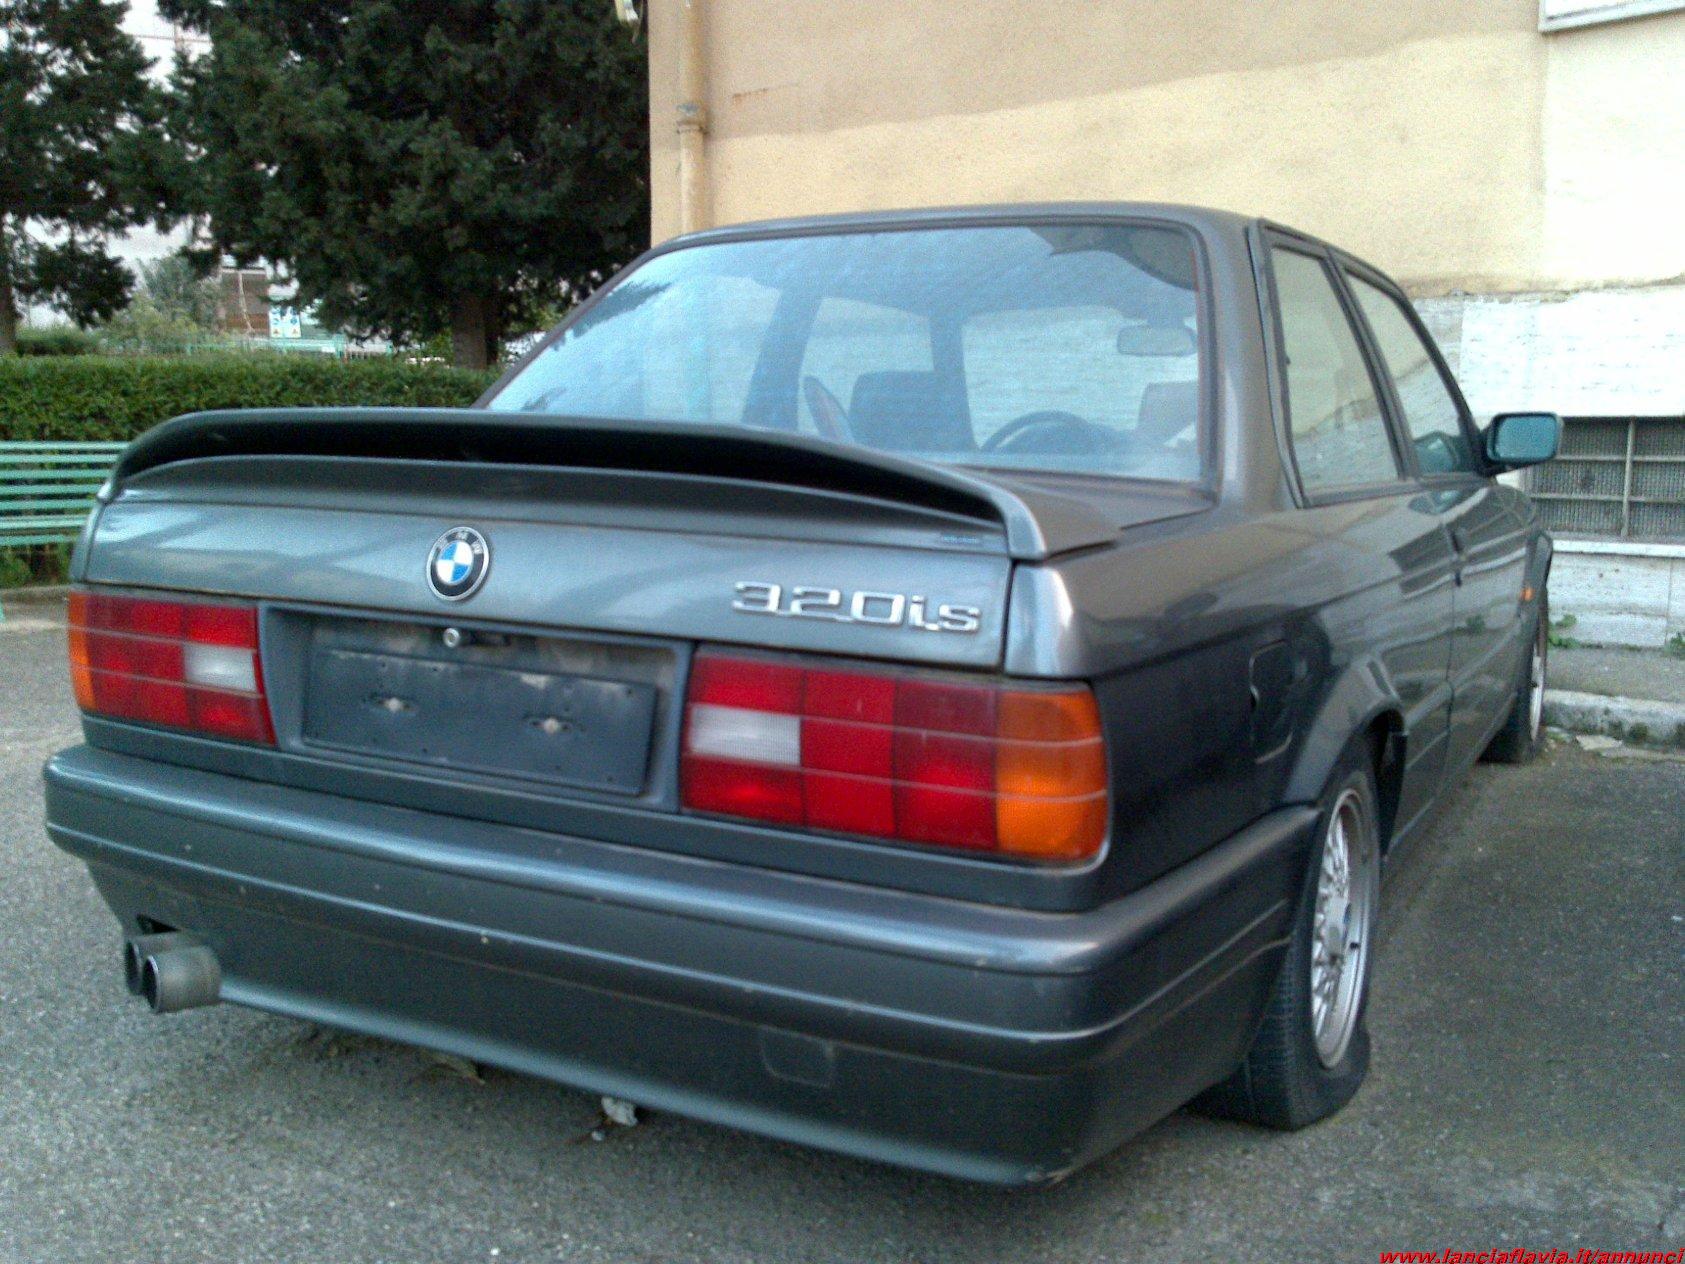 Bmw 320is e30 specs